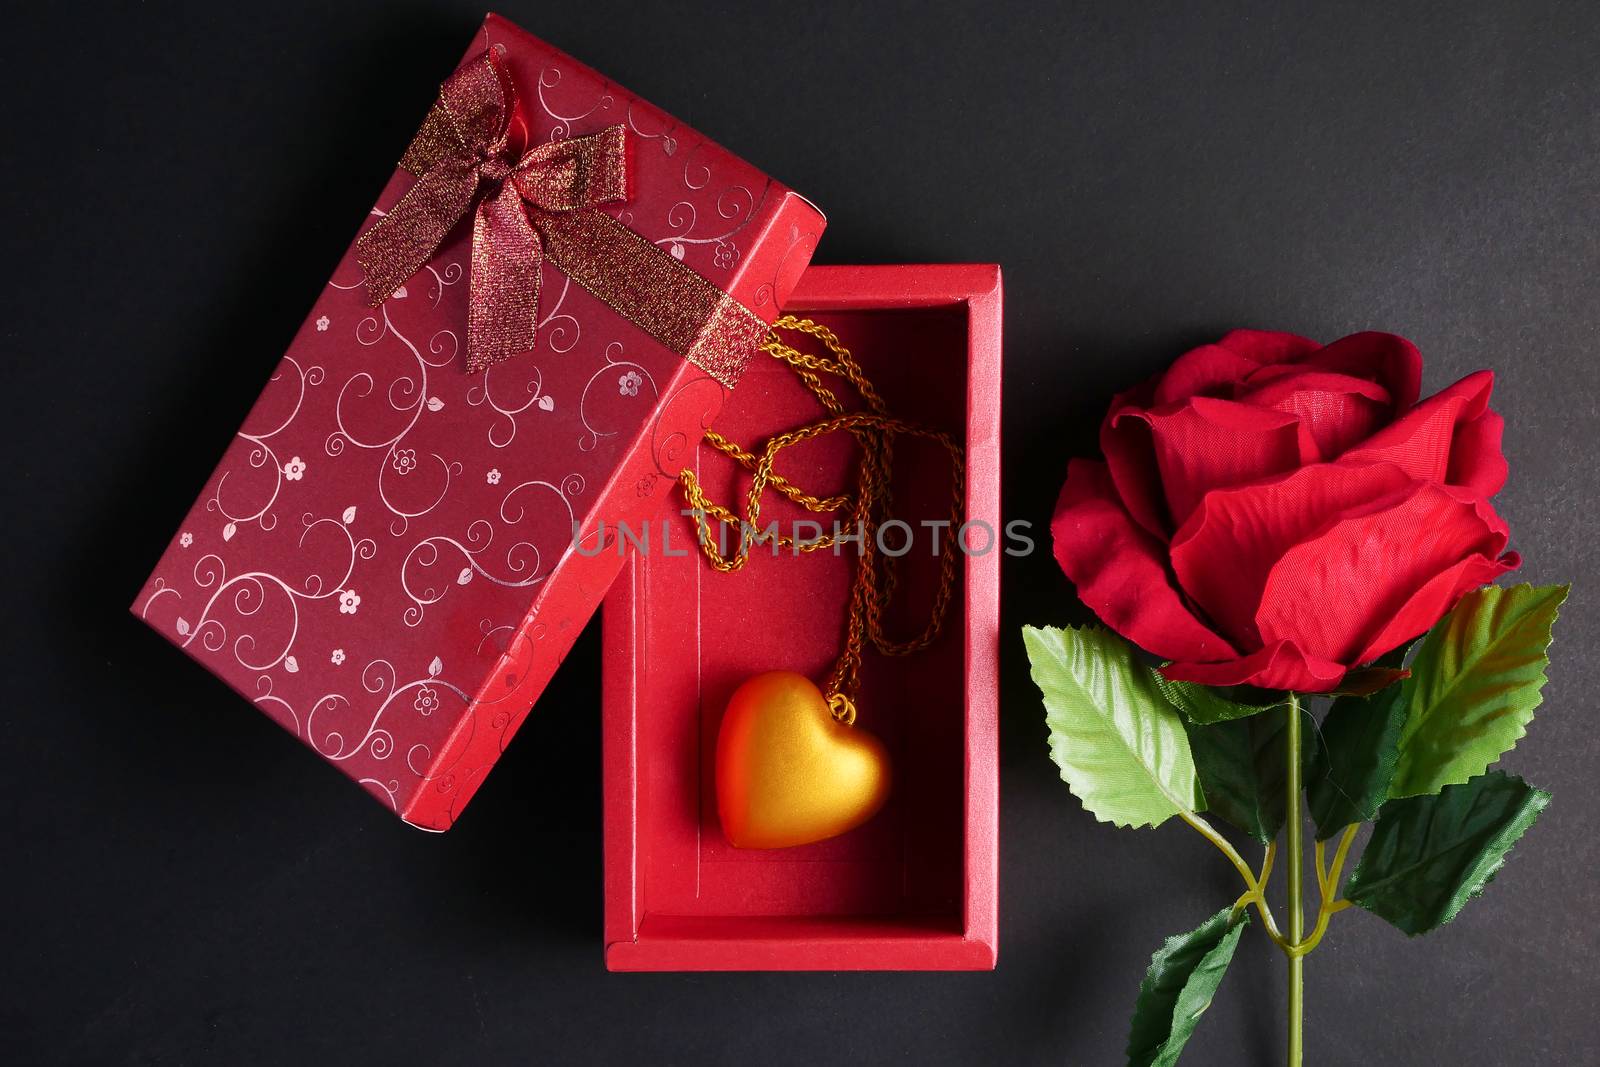 Red rose with gold heart necklace in red gift box on black backg by ronnarong